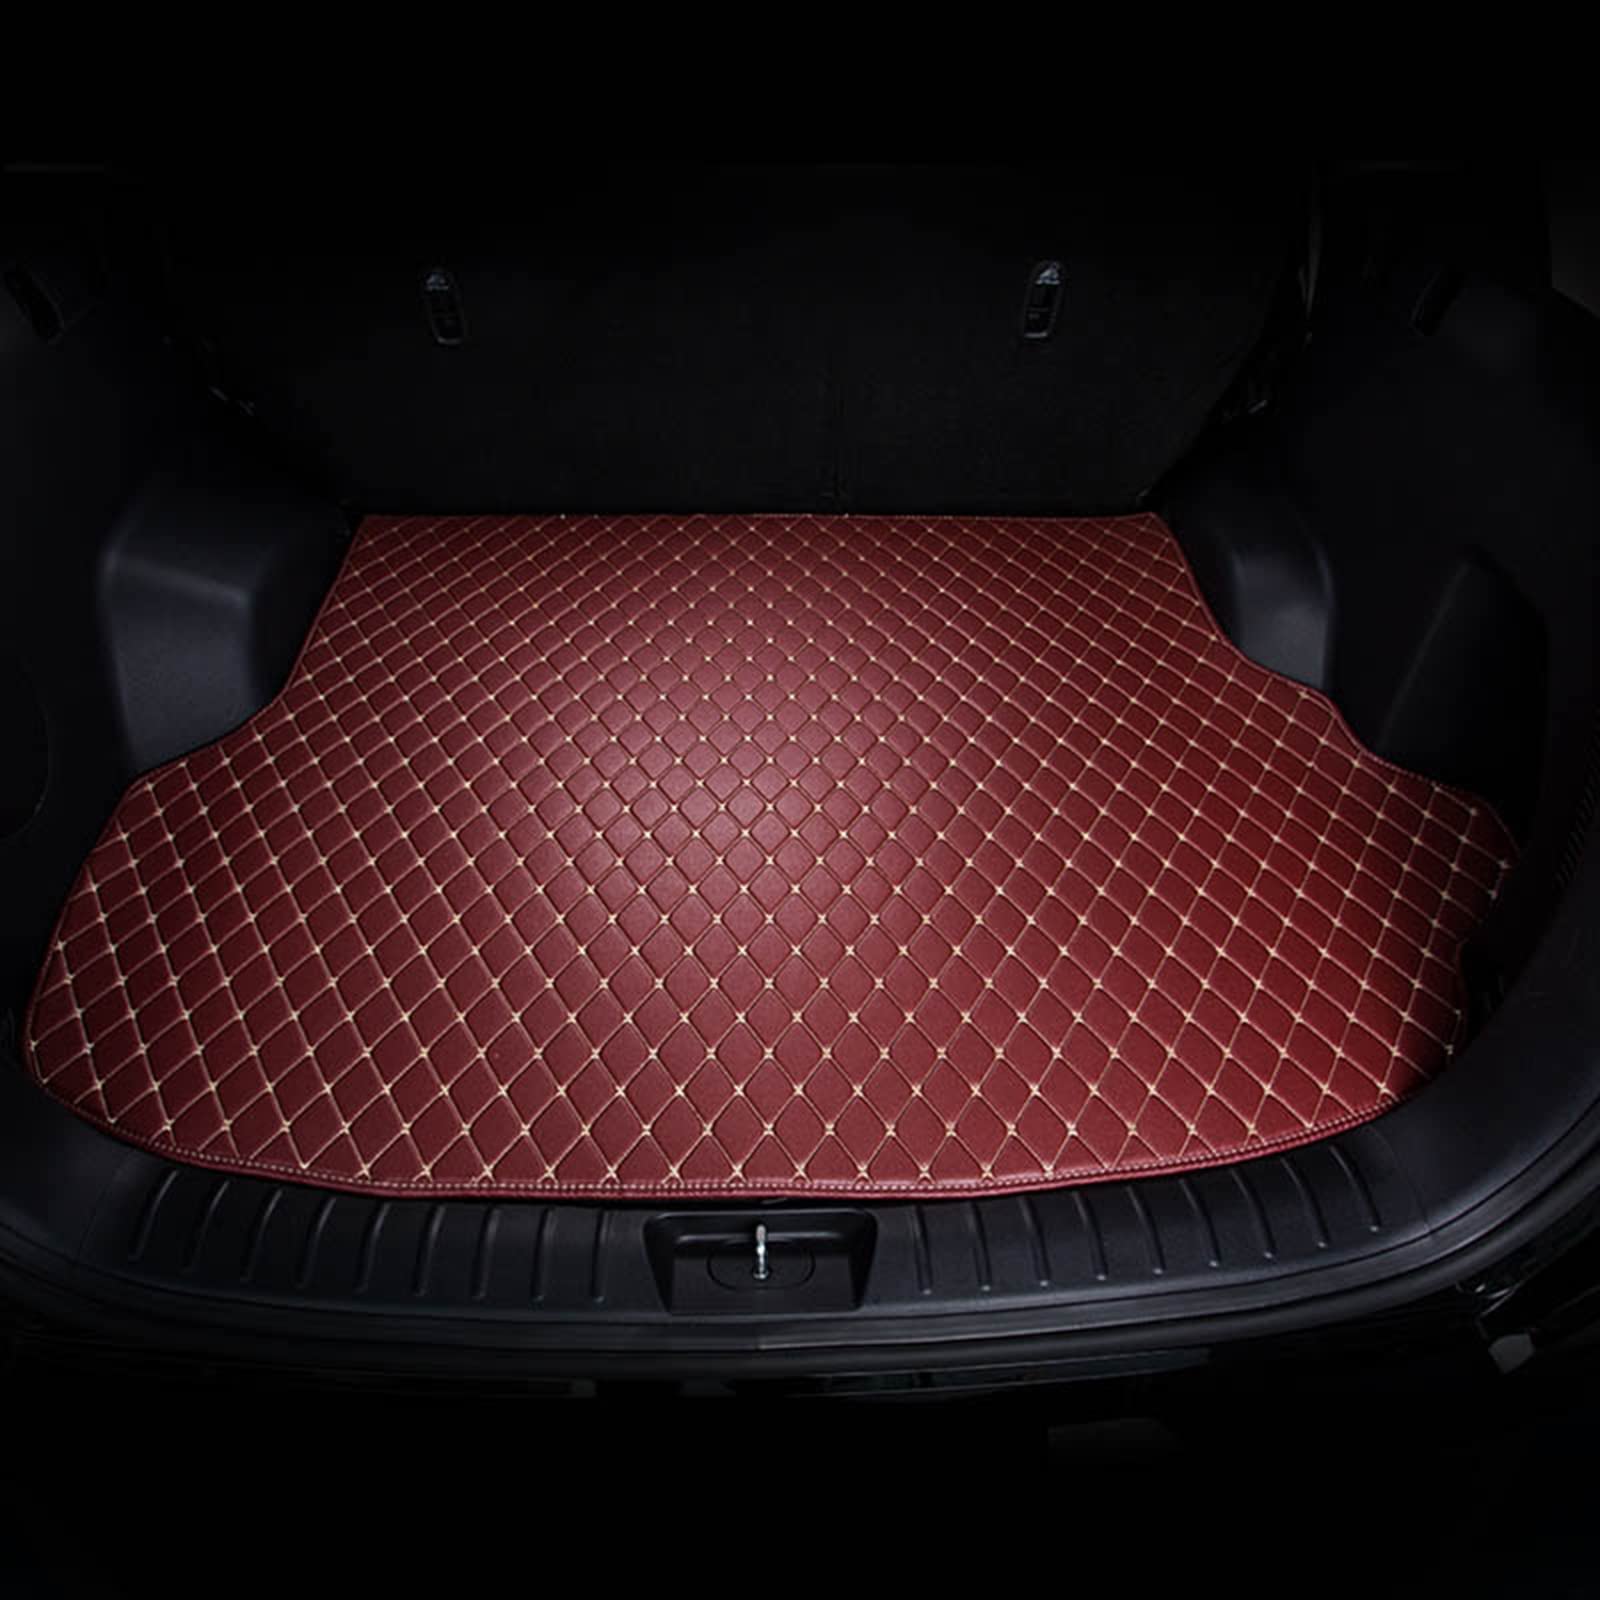 Kompatibel mit BMW 7 Series 2002-2008 e65, Custom Car Leather Boot Mats, All Weather Heavy Duty Leather Boot Mats,4-Wine Red von GODSLLY